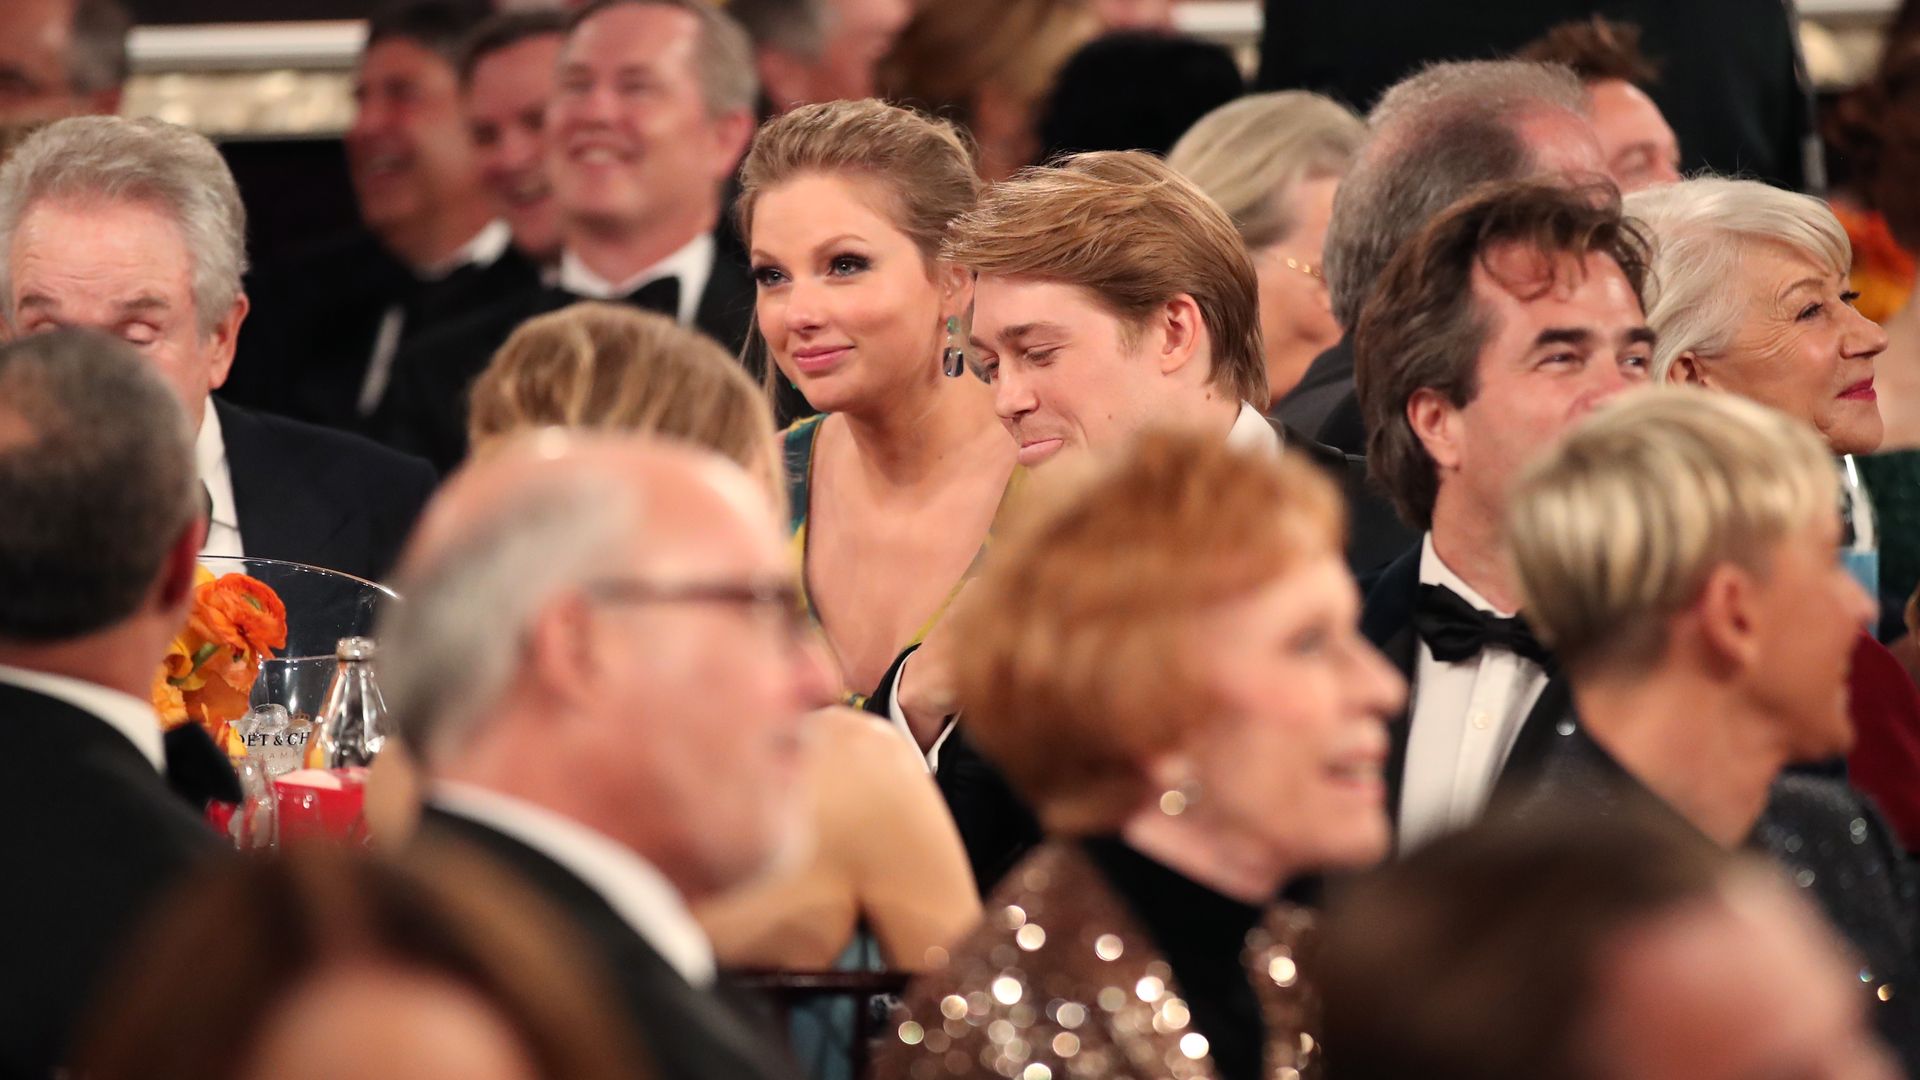 A crowd of faces sat watching an awards ceremony, Joe and Taylor in the mid-distance in focus, smiling